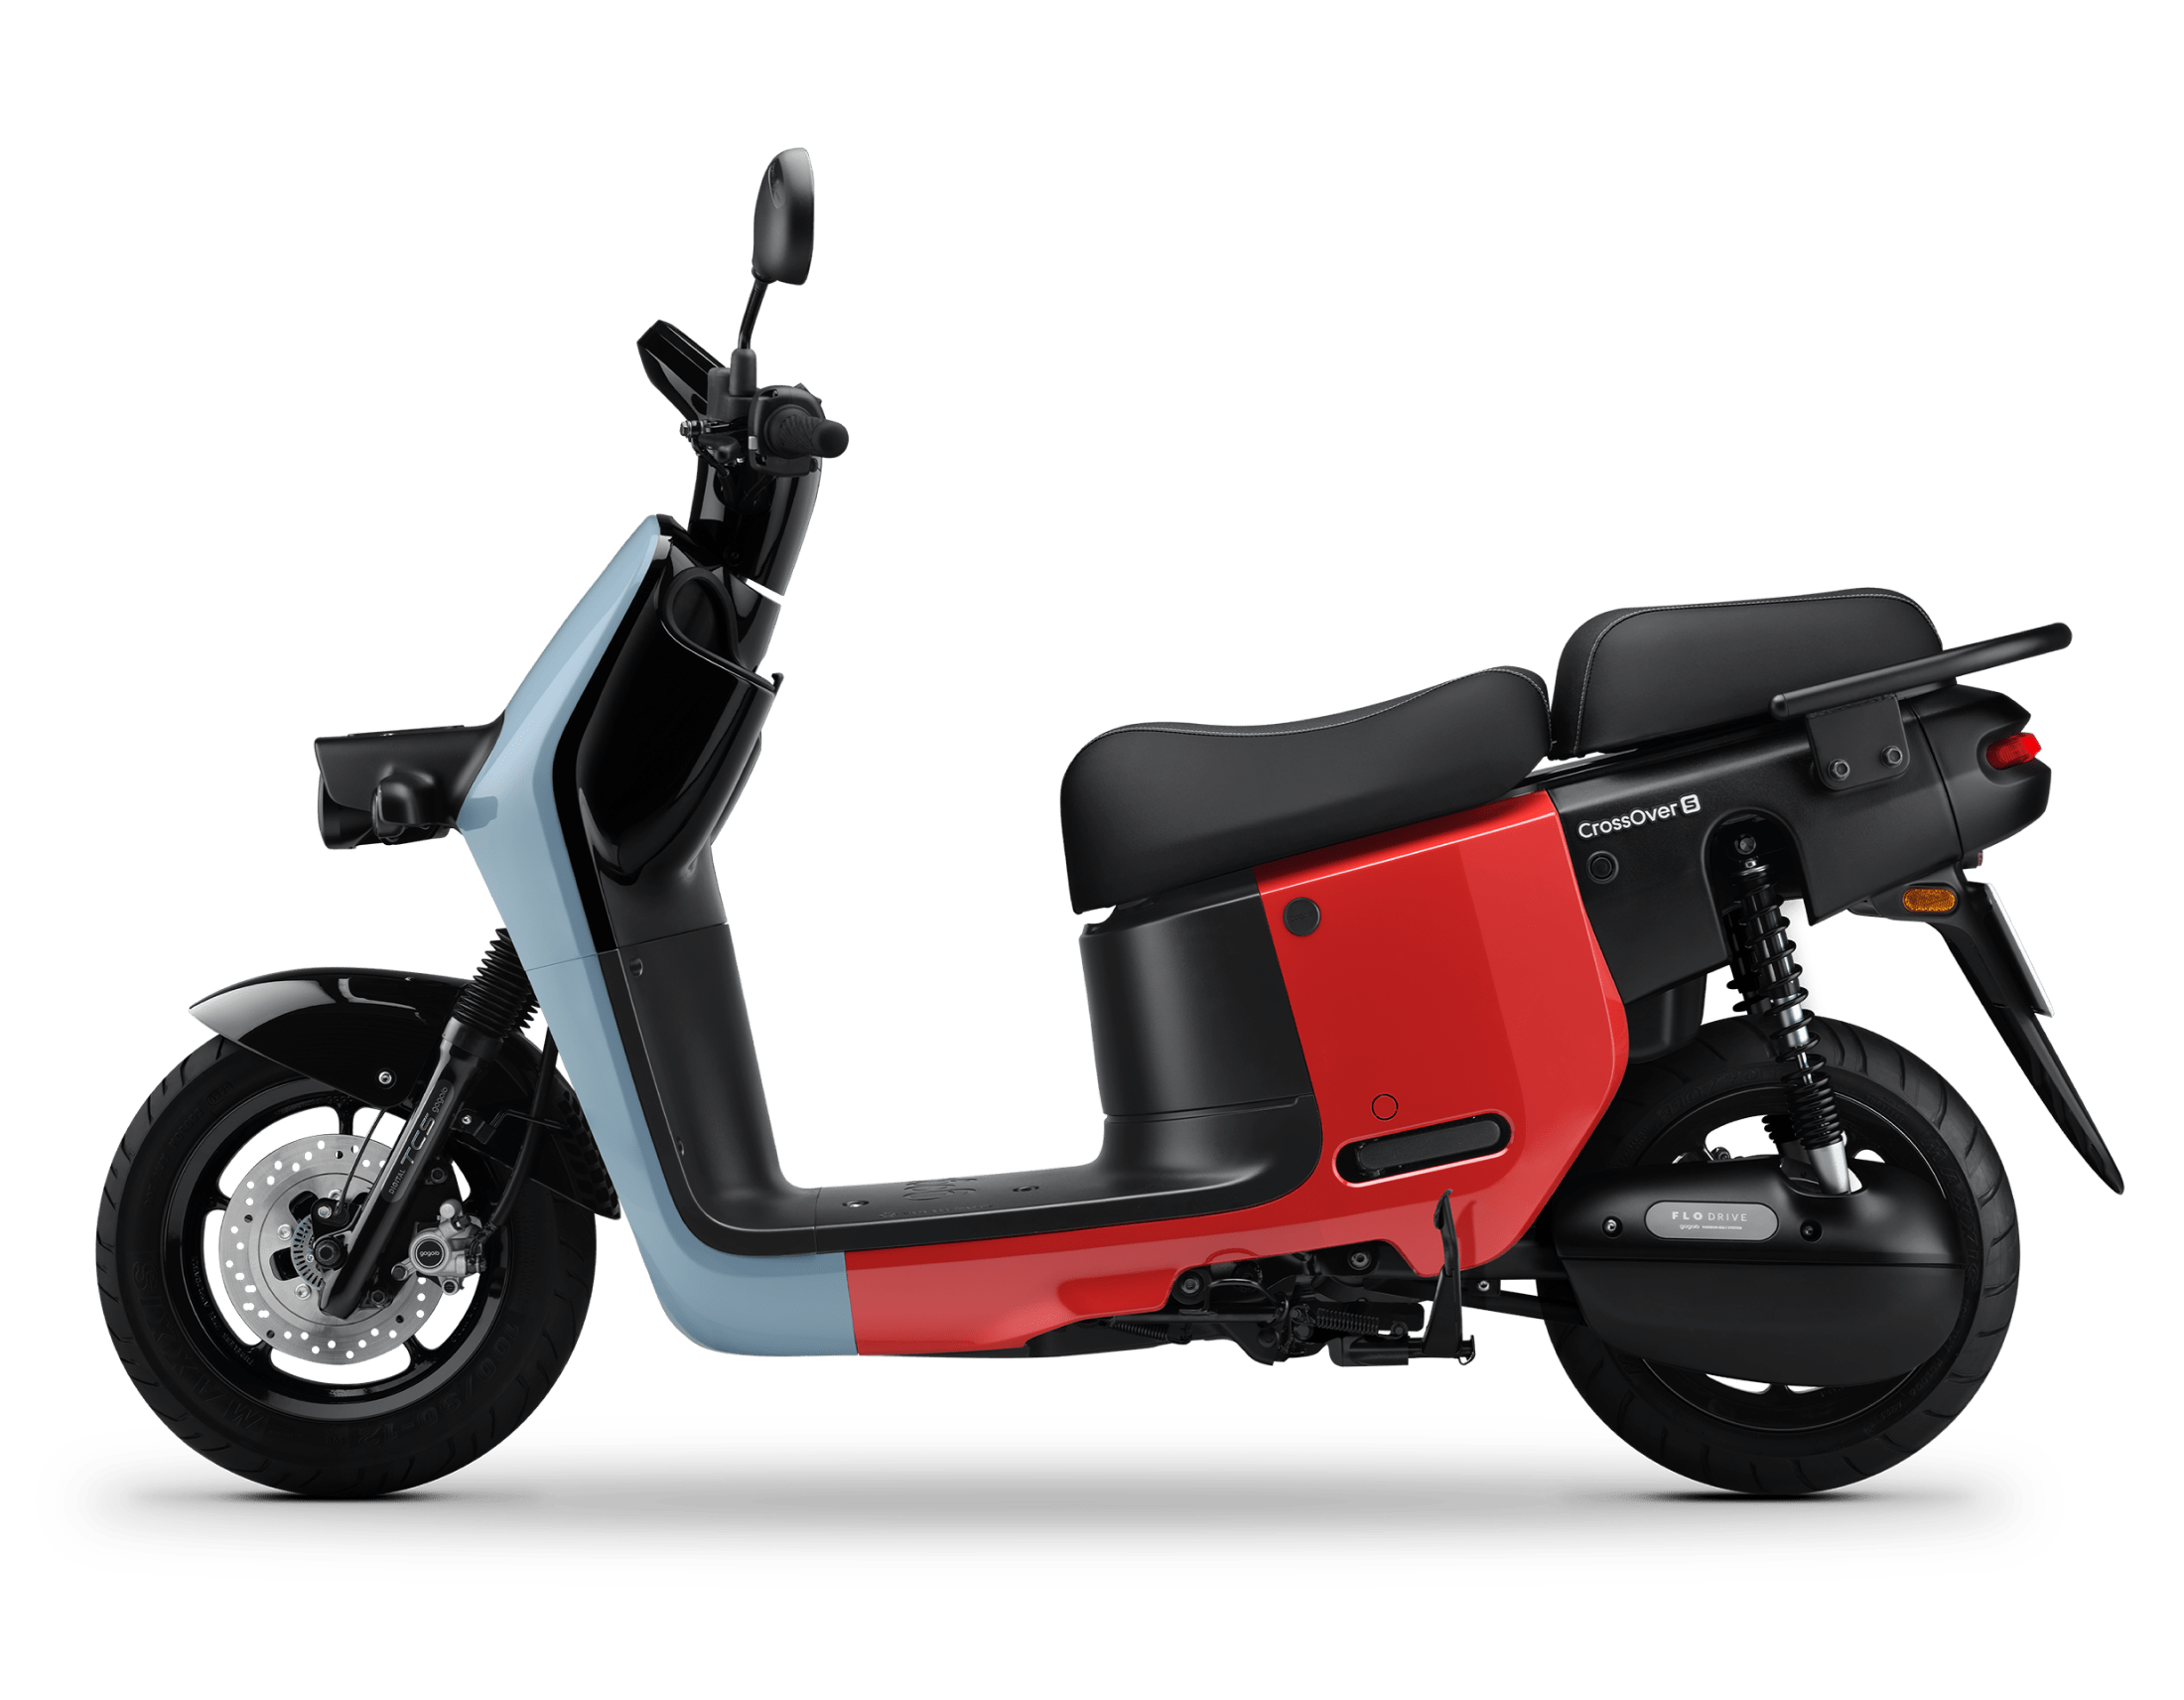 https://e-vehicleinfo.com/global/gogoro-crossover-electric-scooter-launched-as-first-two-wheel-suv/